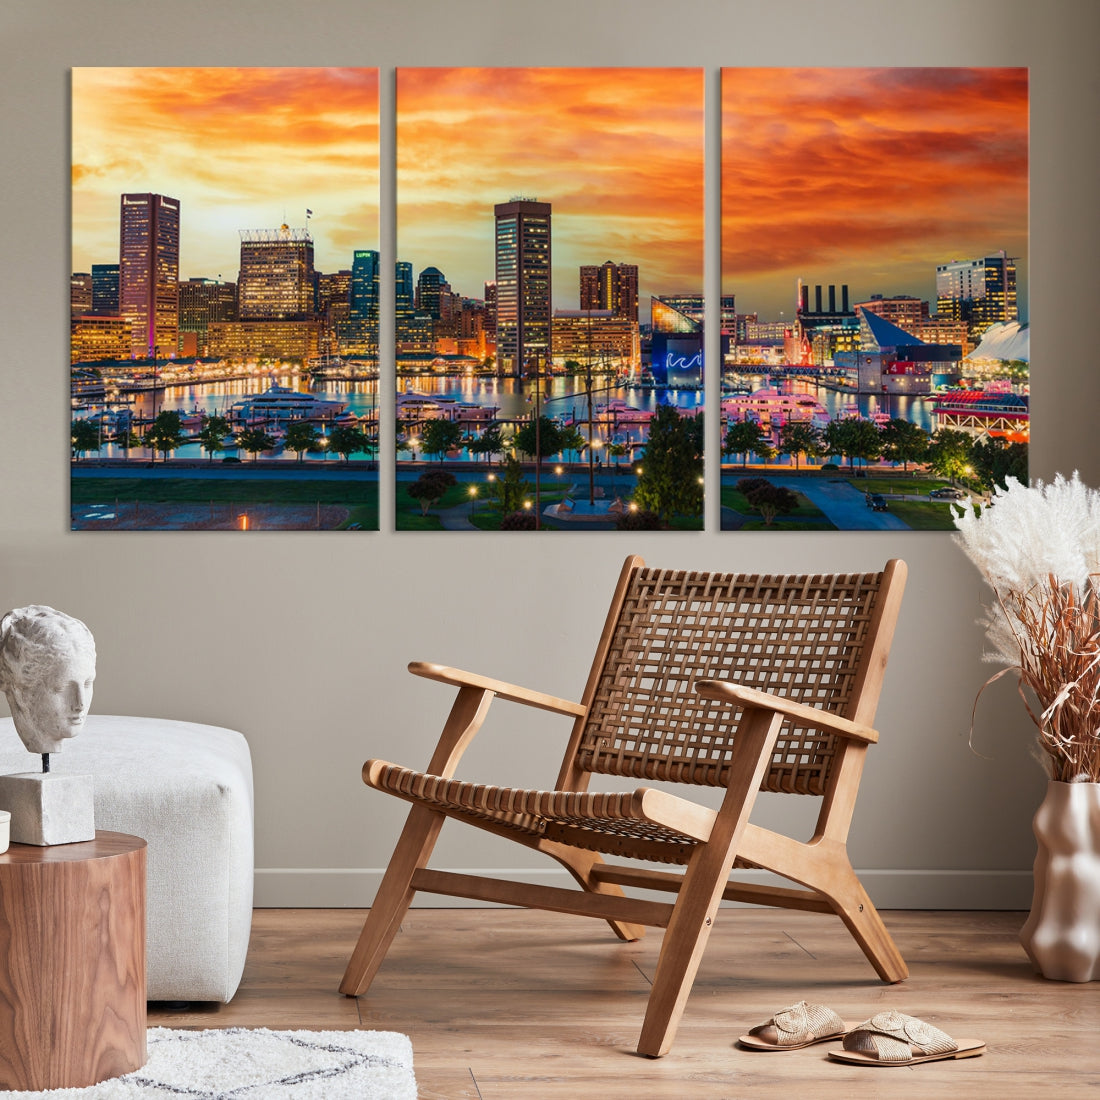 Sunset over Baltimore City Skyline Canvas Wall Art Large Cityscape Print